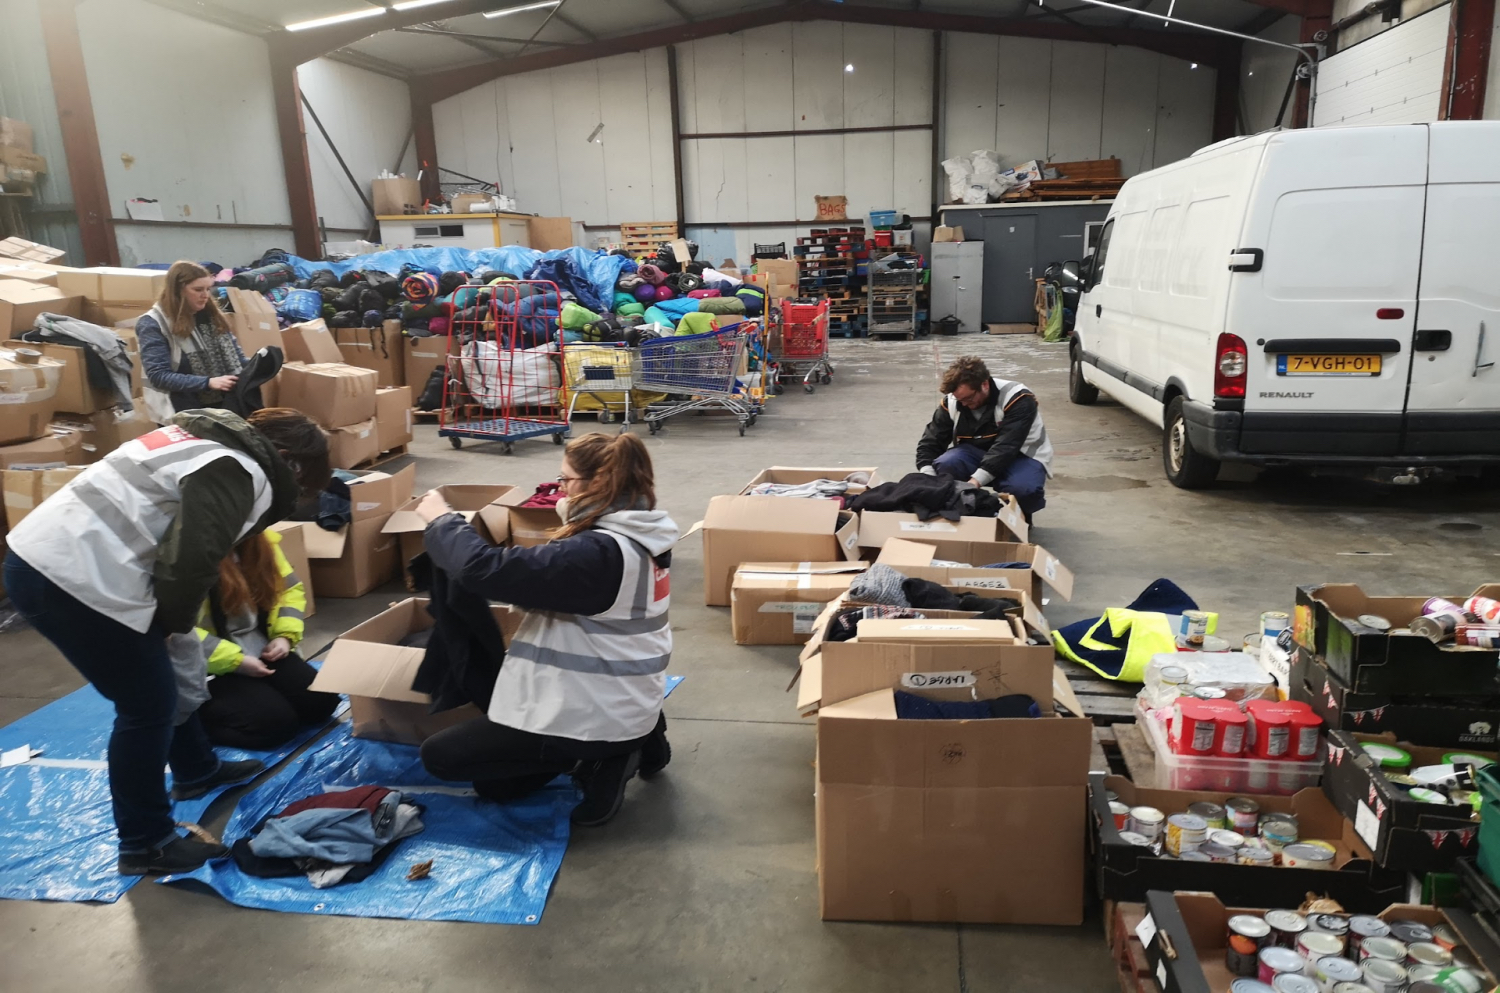 Workers in hi-vis jackets and a white van in a warehouse sorting through boxes of clothing and food goods